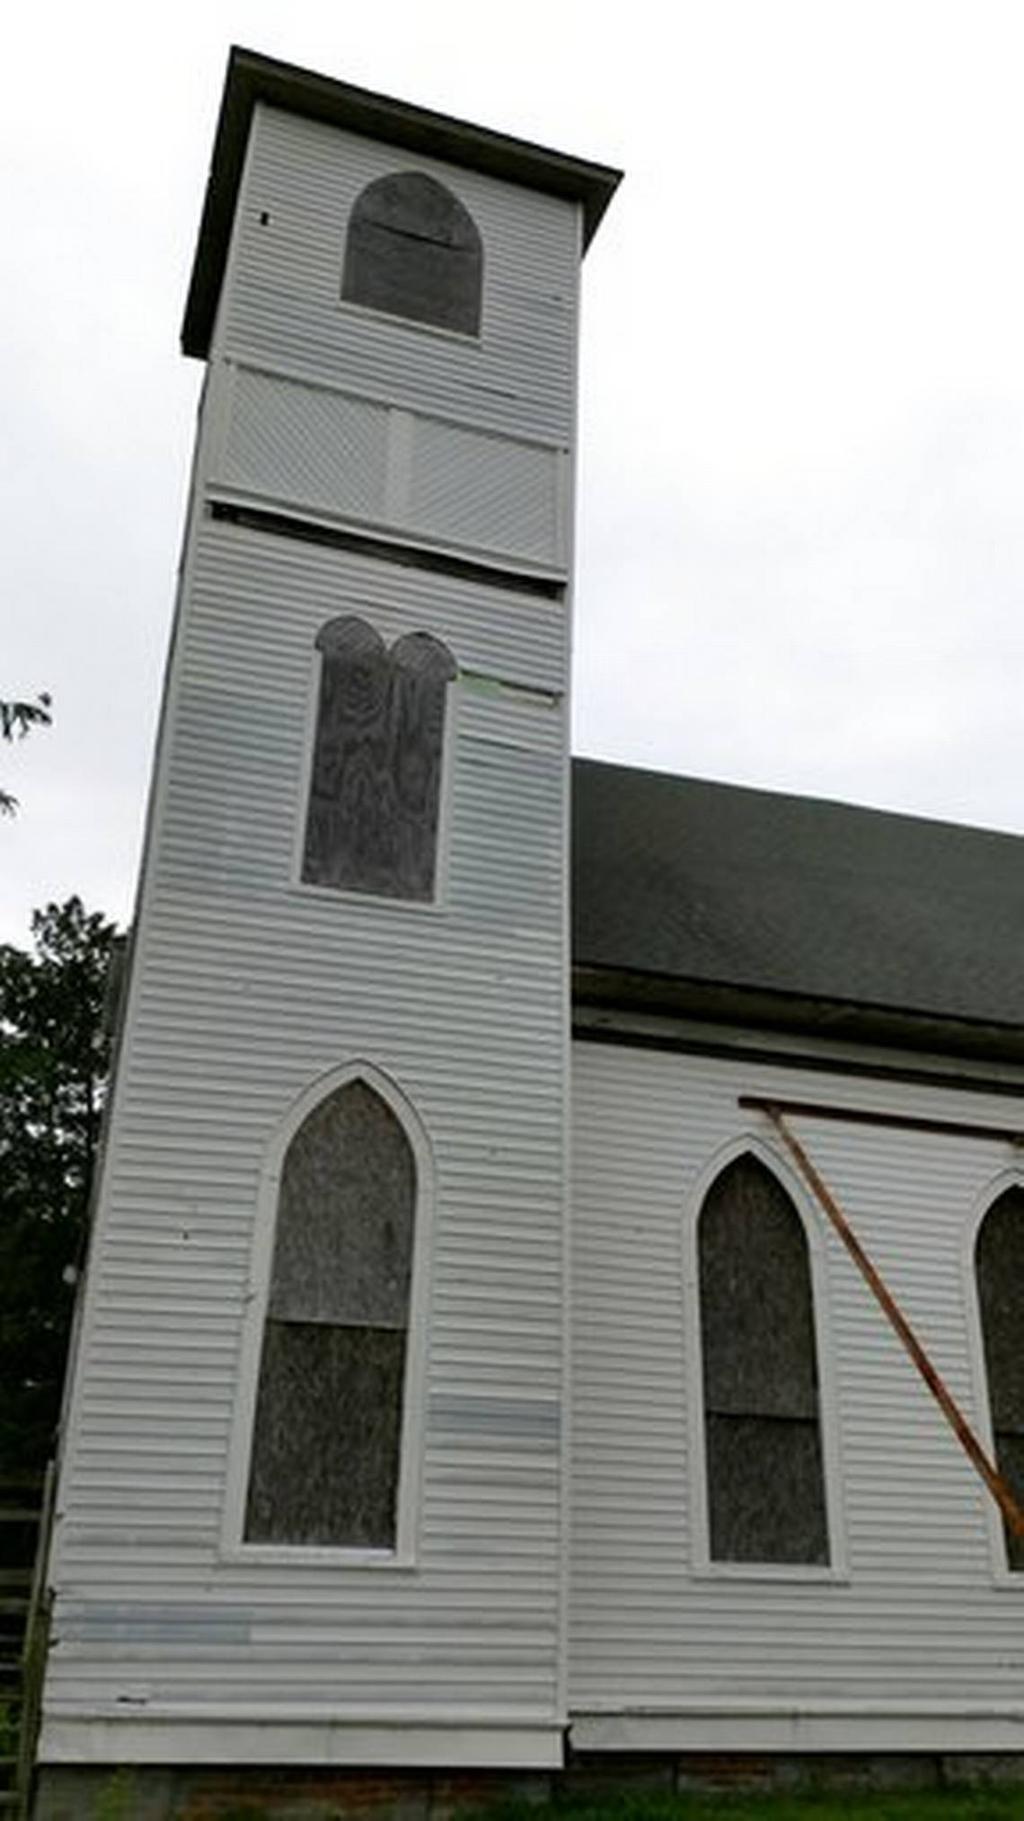 Congregation works to save centuryold chapel By JEFF